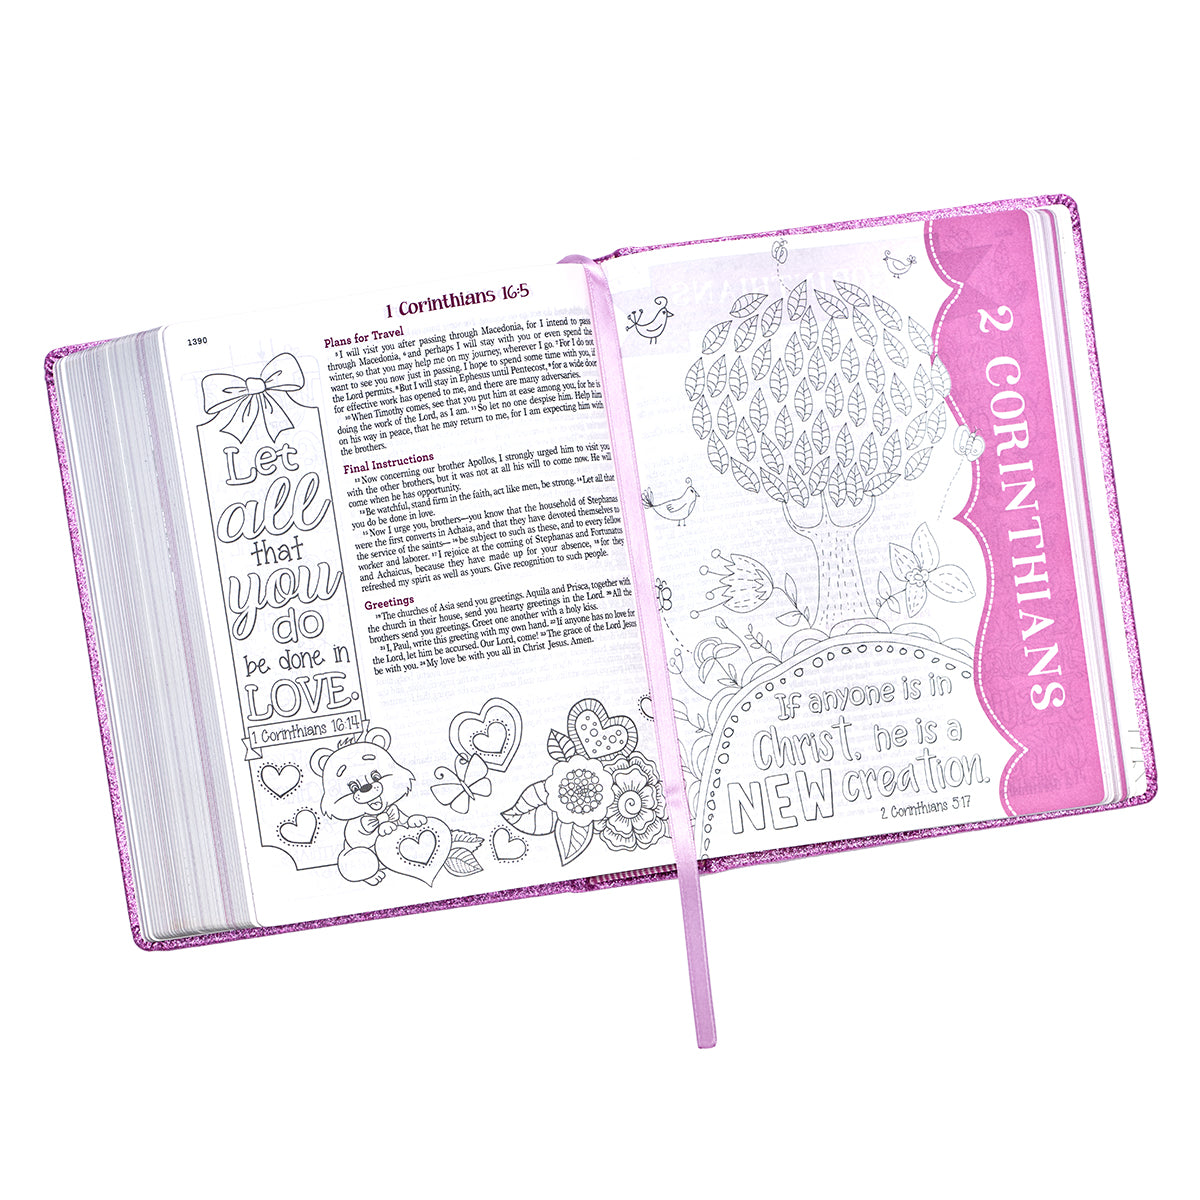 Image of My Creative Bible Purple Glitter Hardcover other